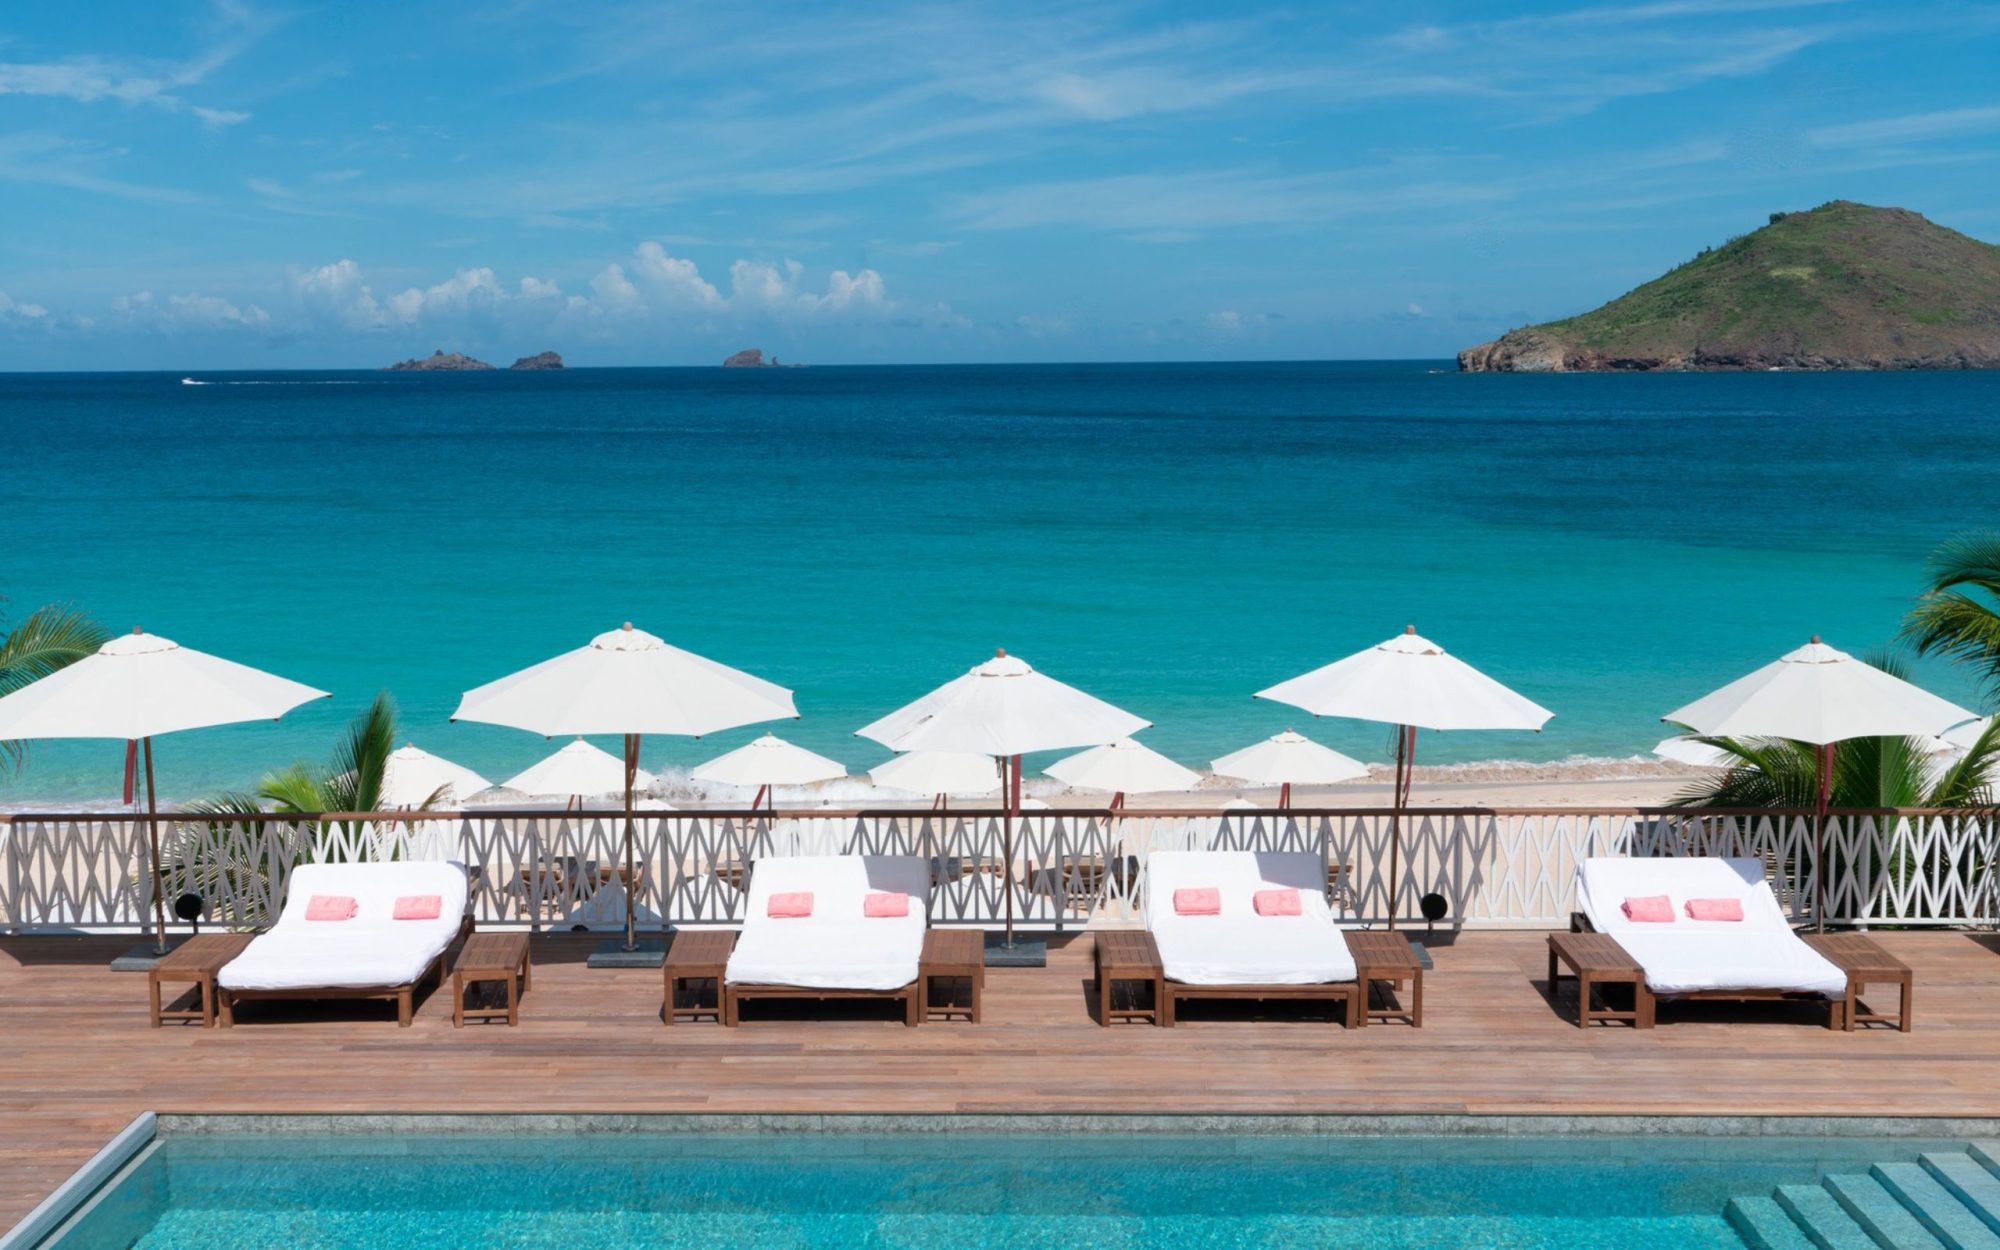 Cheval Blanc St-Barth is the definition of classic luxury in the Caribbean